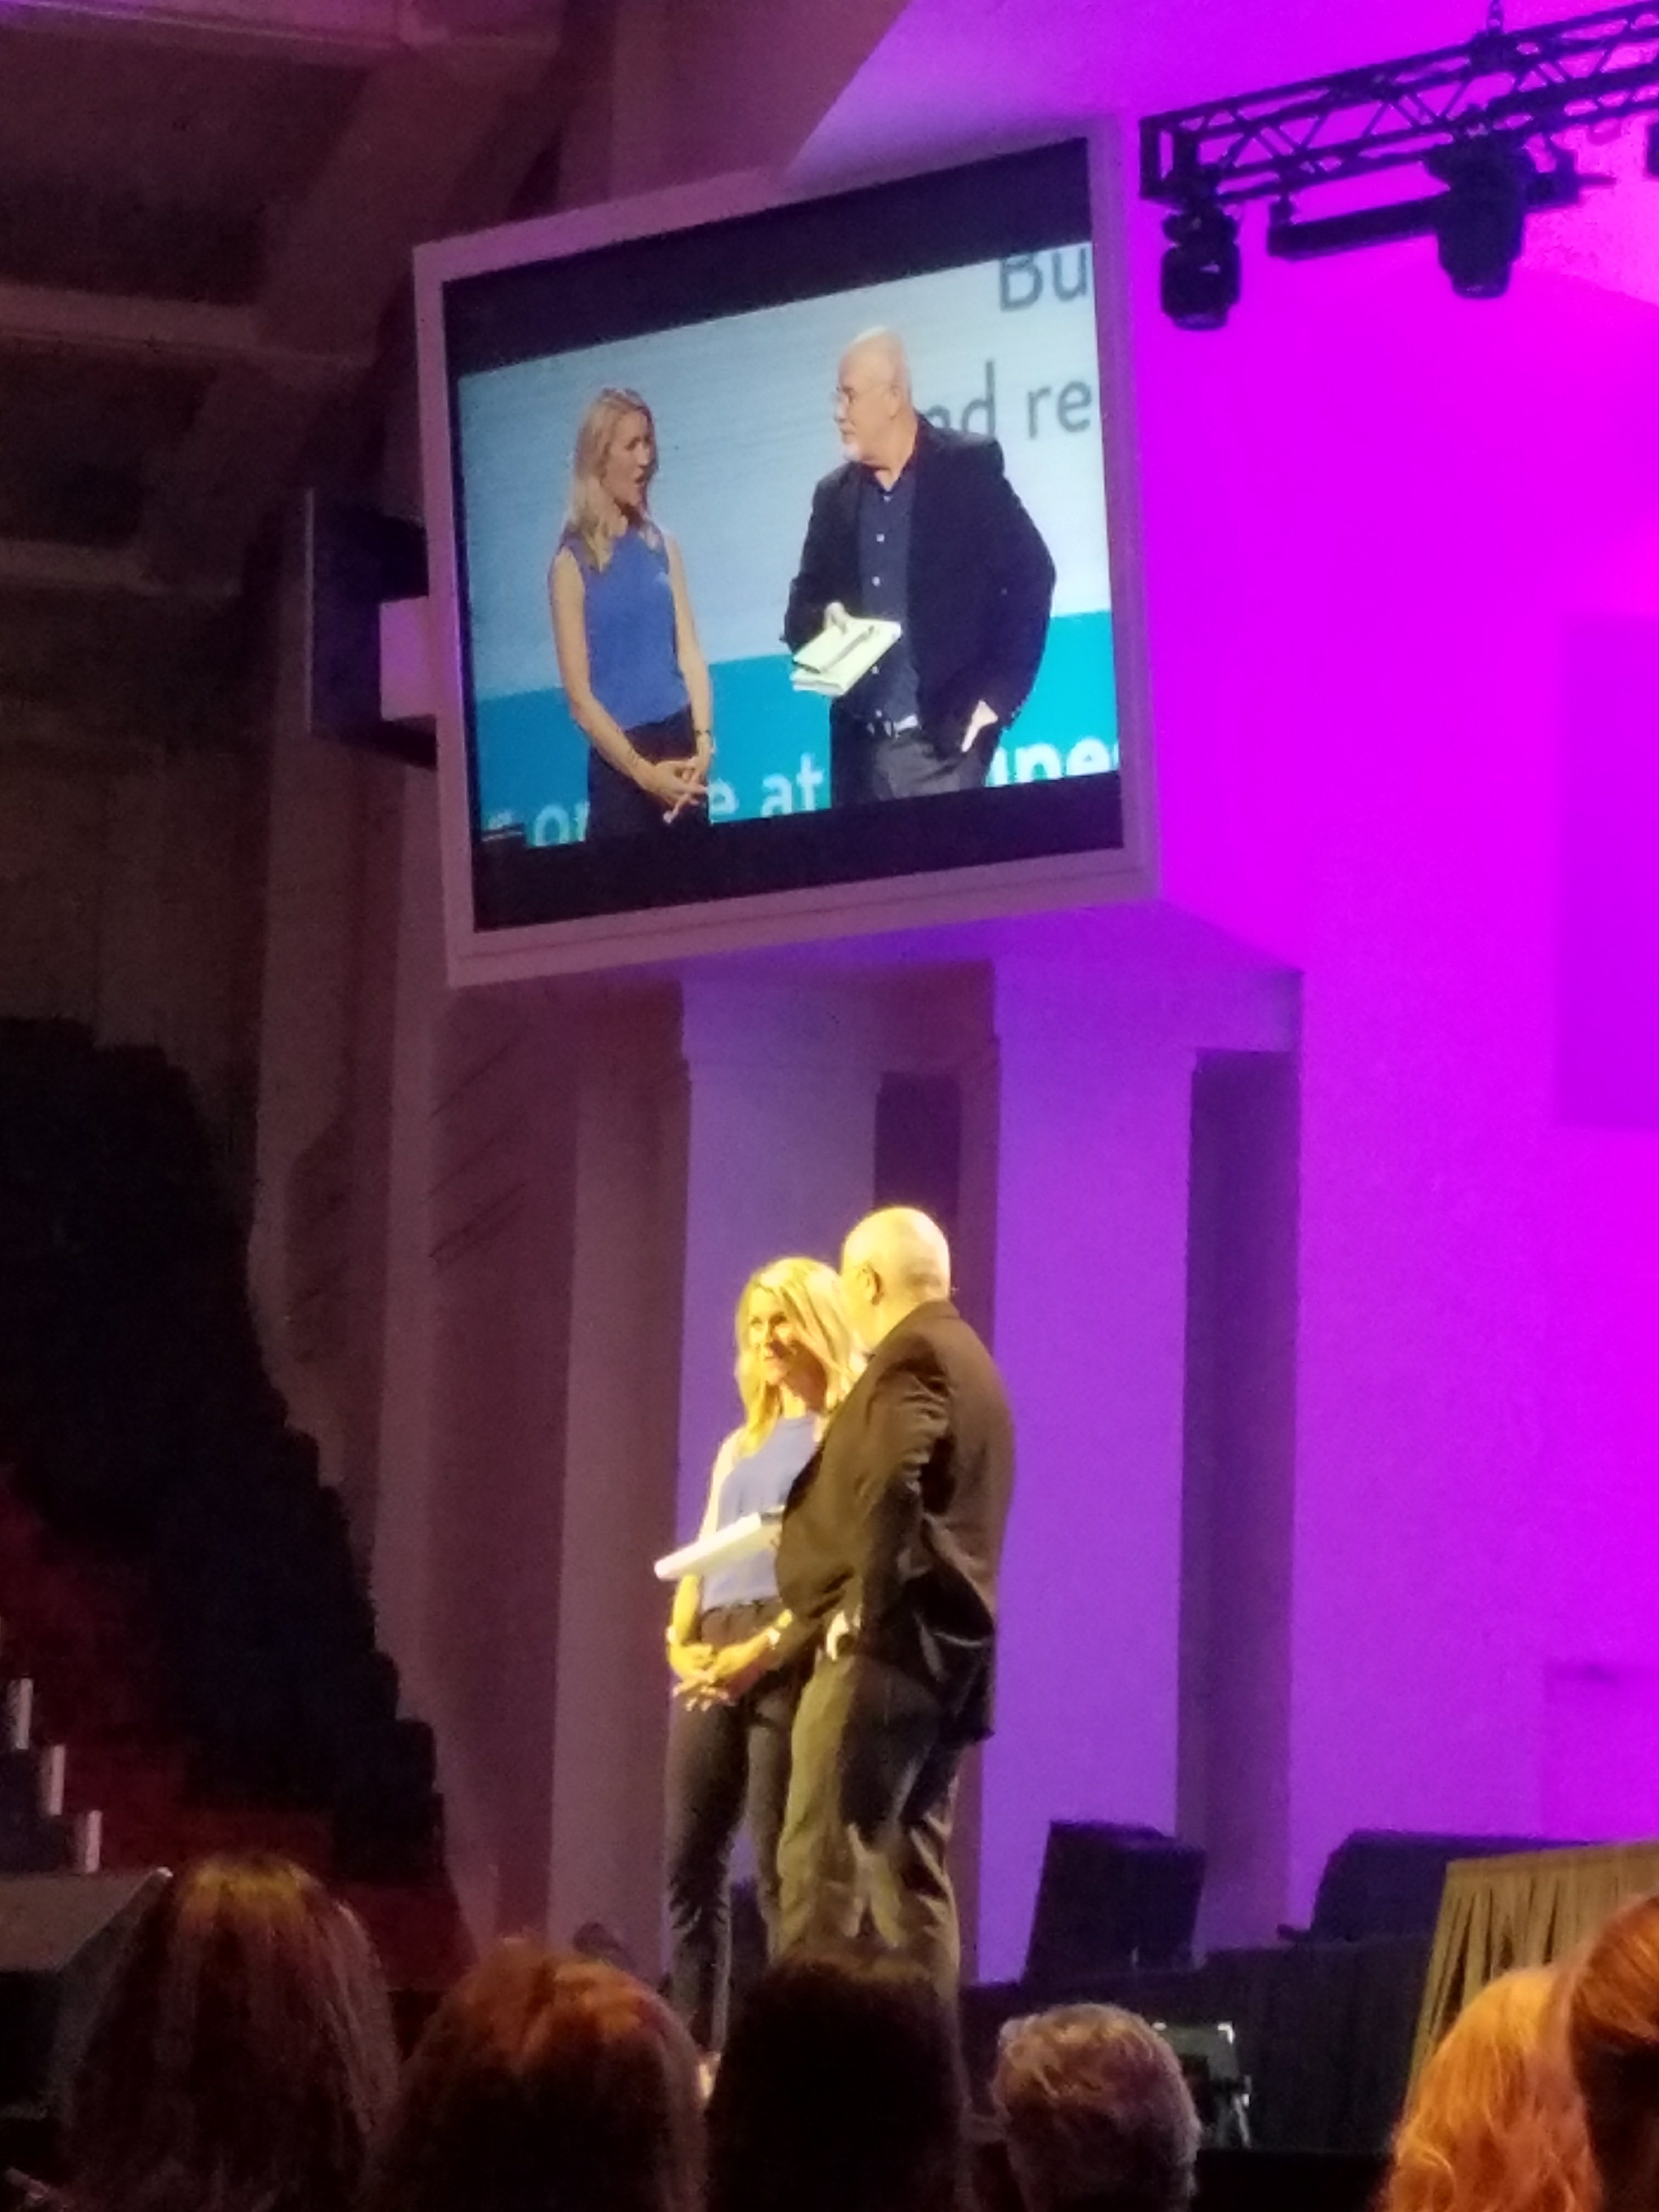 Christy Wright and Dave Ramsey on stage at a Business Boutique Event